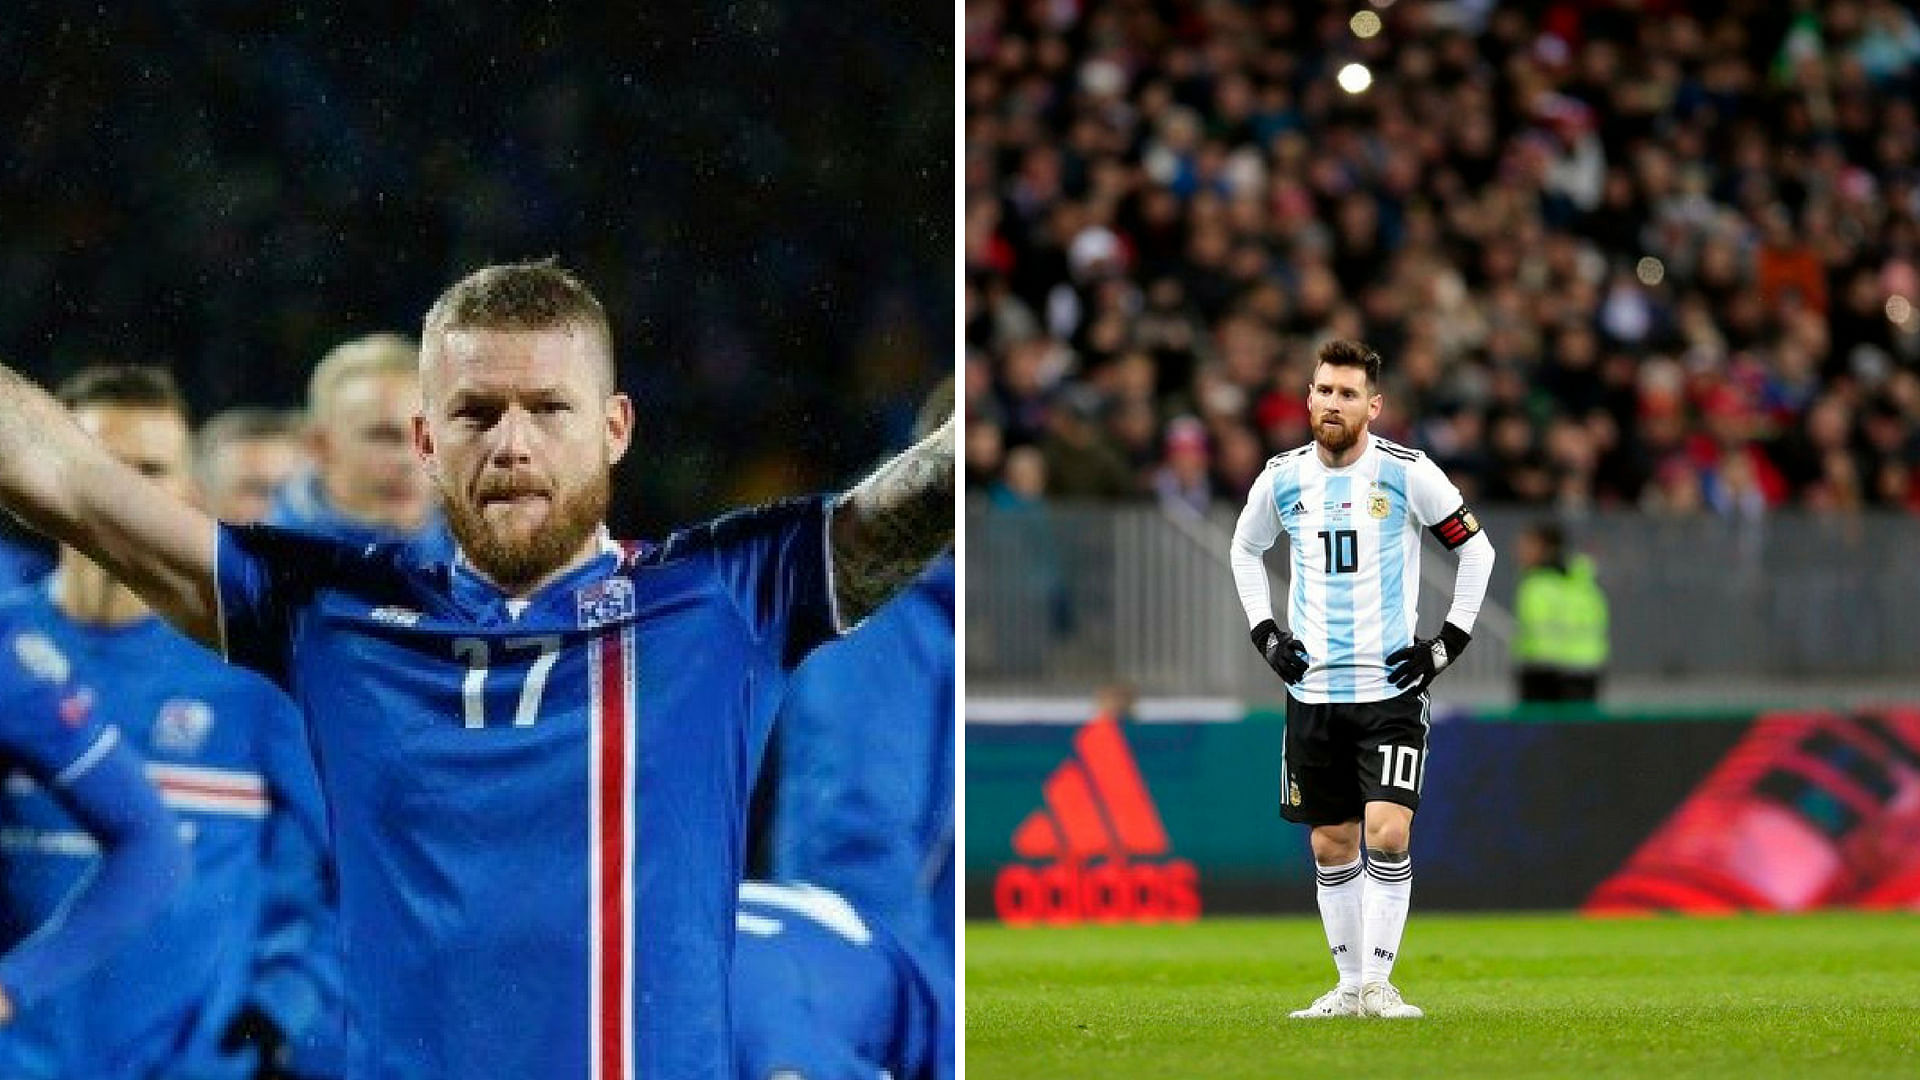 Iceland begin their spirited campaign against the “best player in the world”, Lionel Messi, who  seeks his first World Cup trophy.